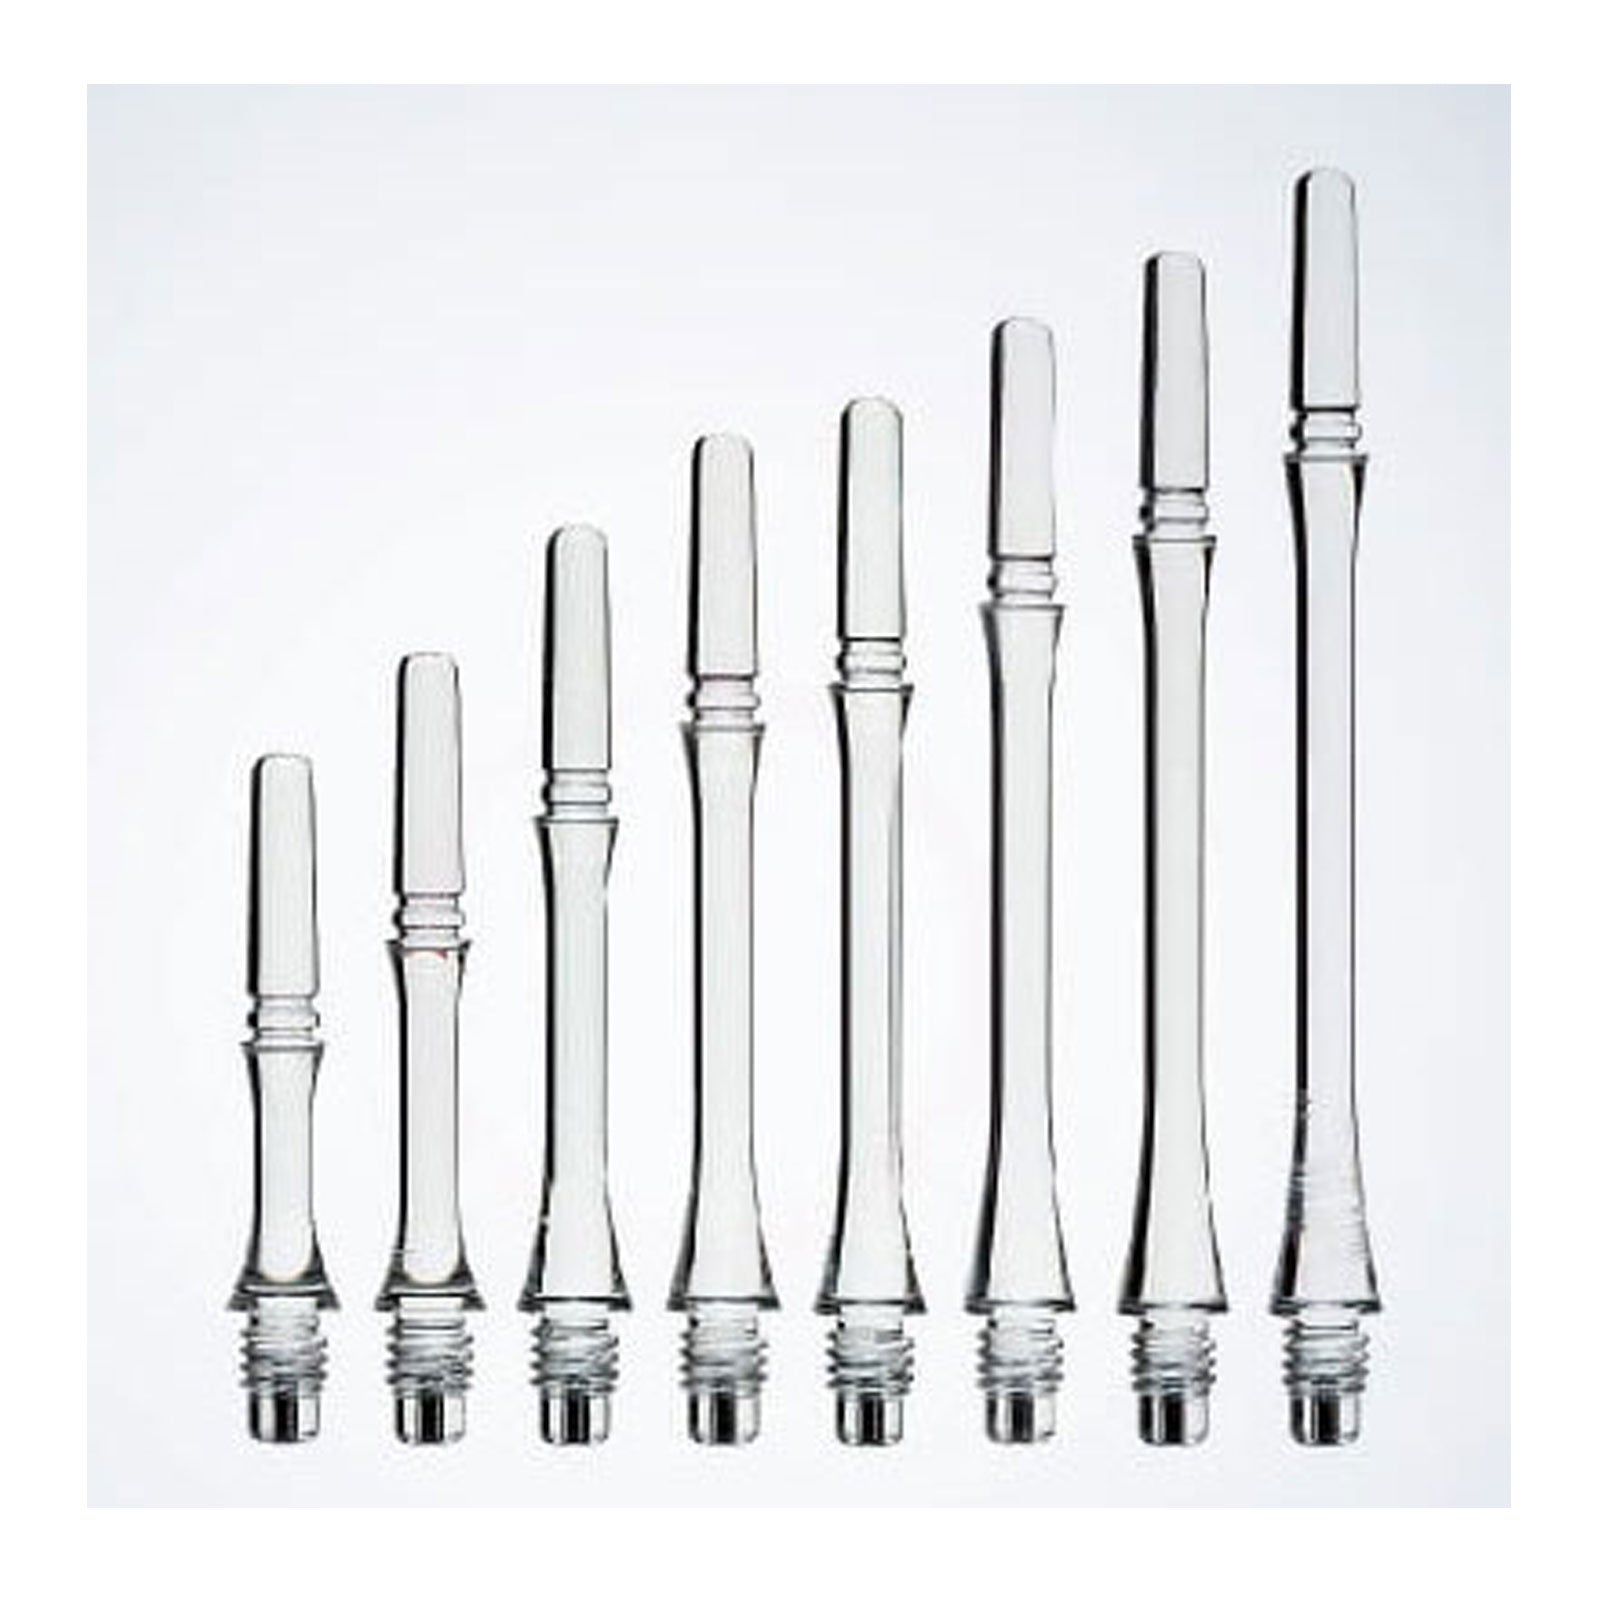 Cosmo Stems - Slim Spinning Clear Shafts - Sizes 1 - 6